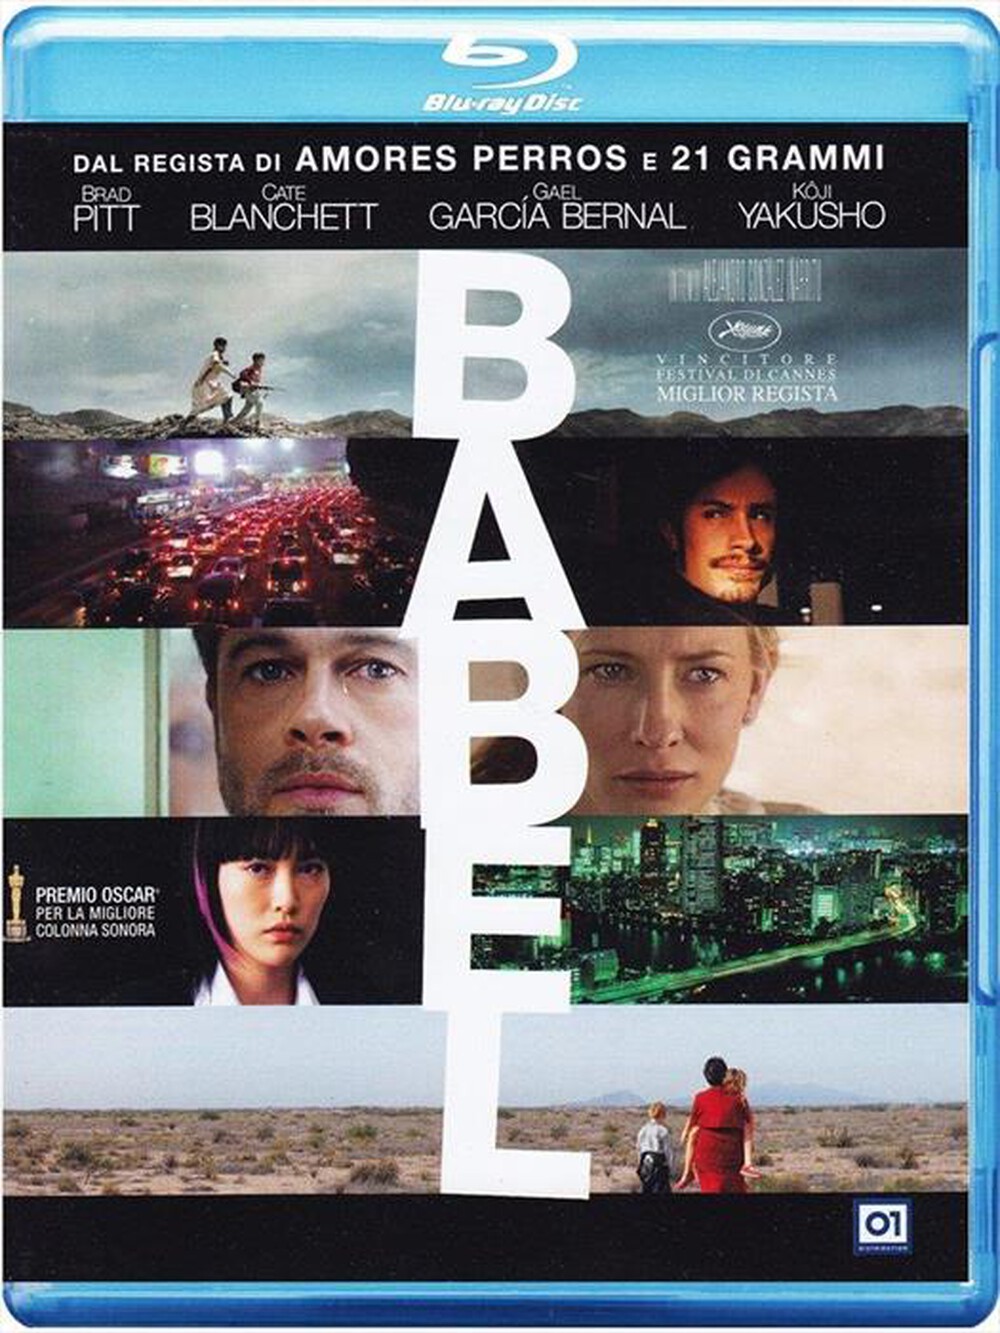 "EAGLE PICTURES - Babel"